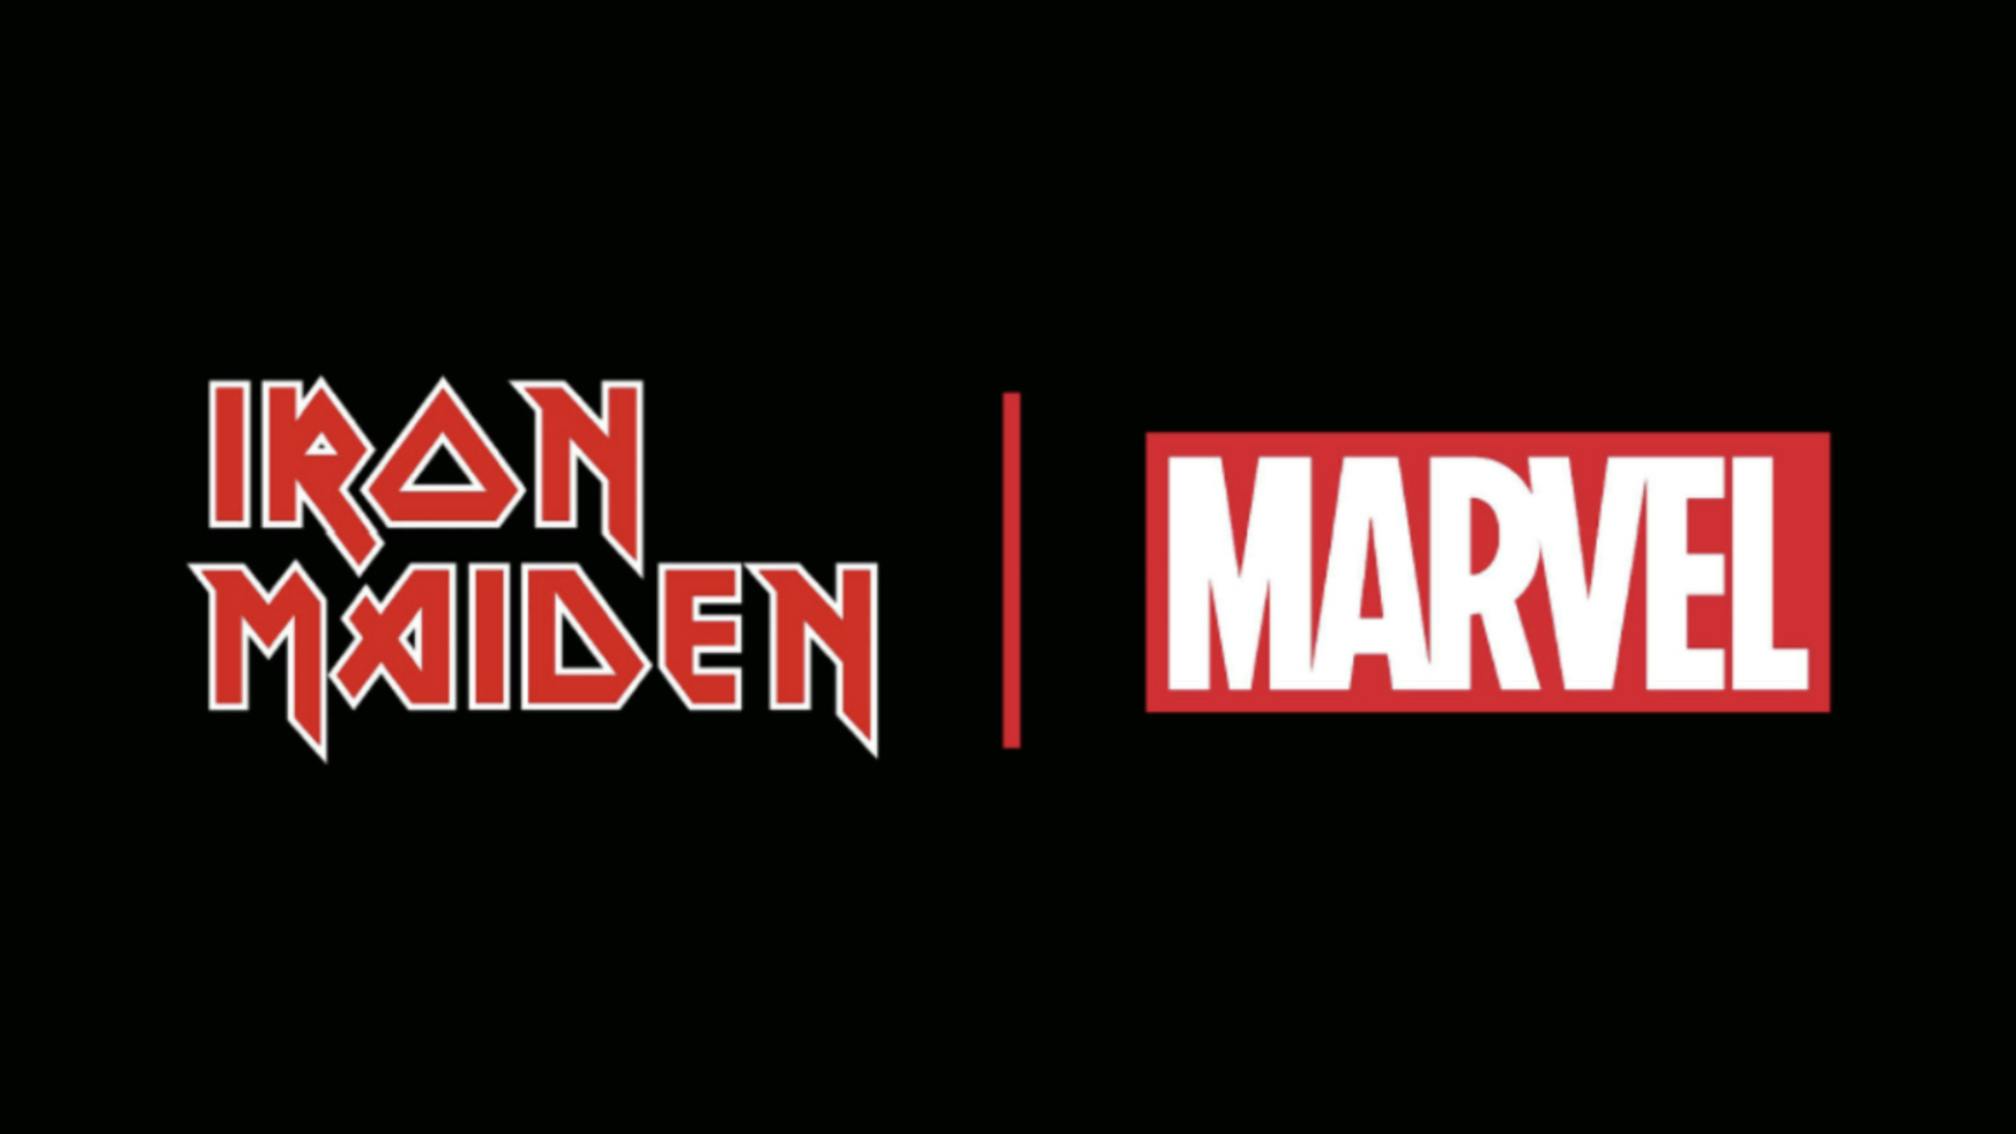 Iron Maiden and Marvel launch massive new collab in time for the holidays